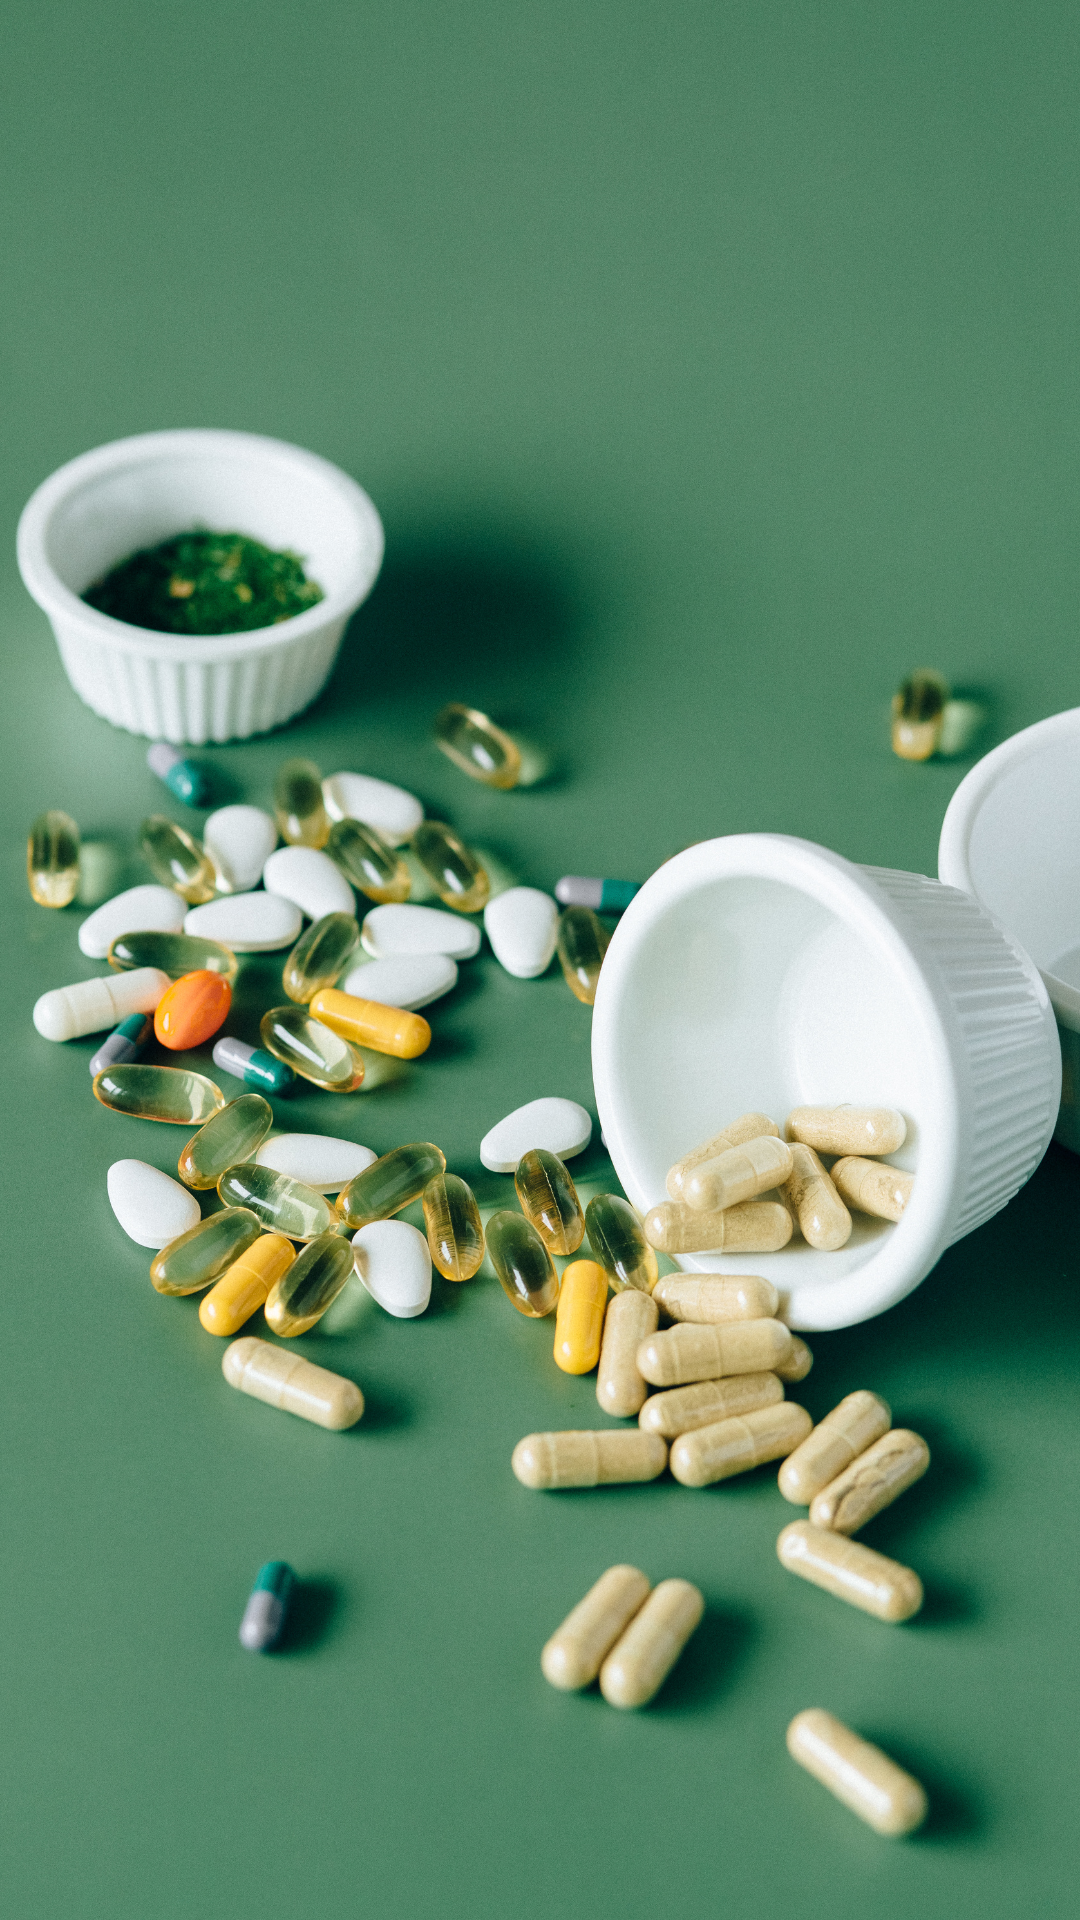 Wondering the best candida supplements to clear a candida overgrowth? Here’s a nutritionist’s round-up of the best options you can trust.